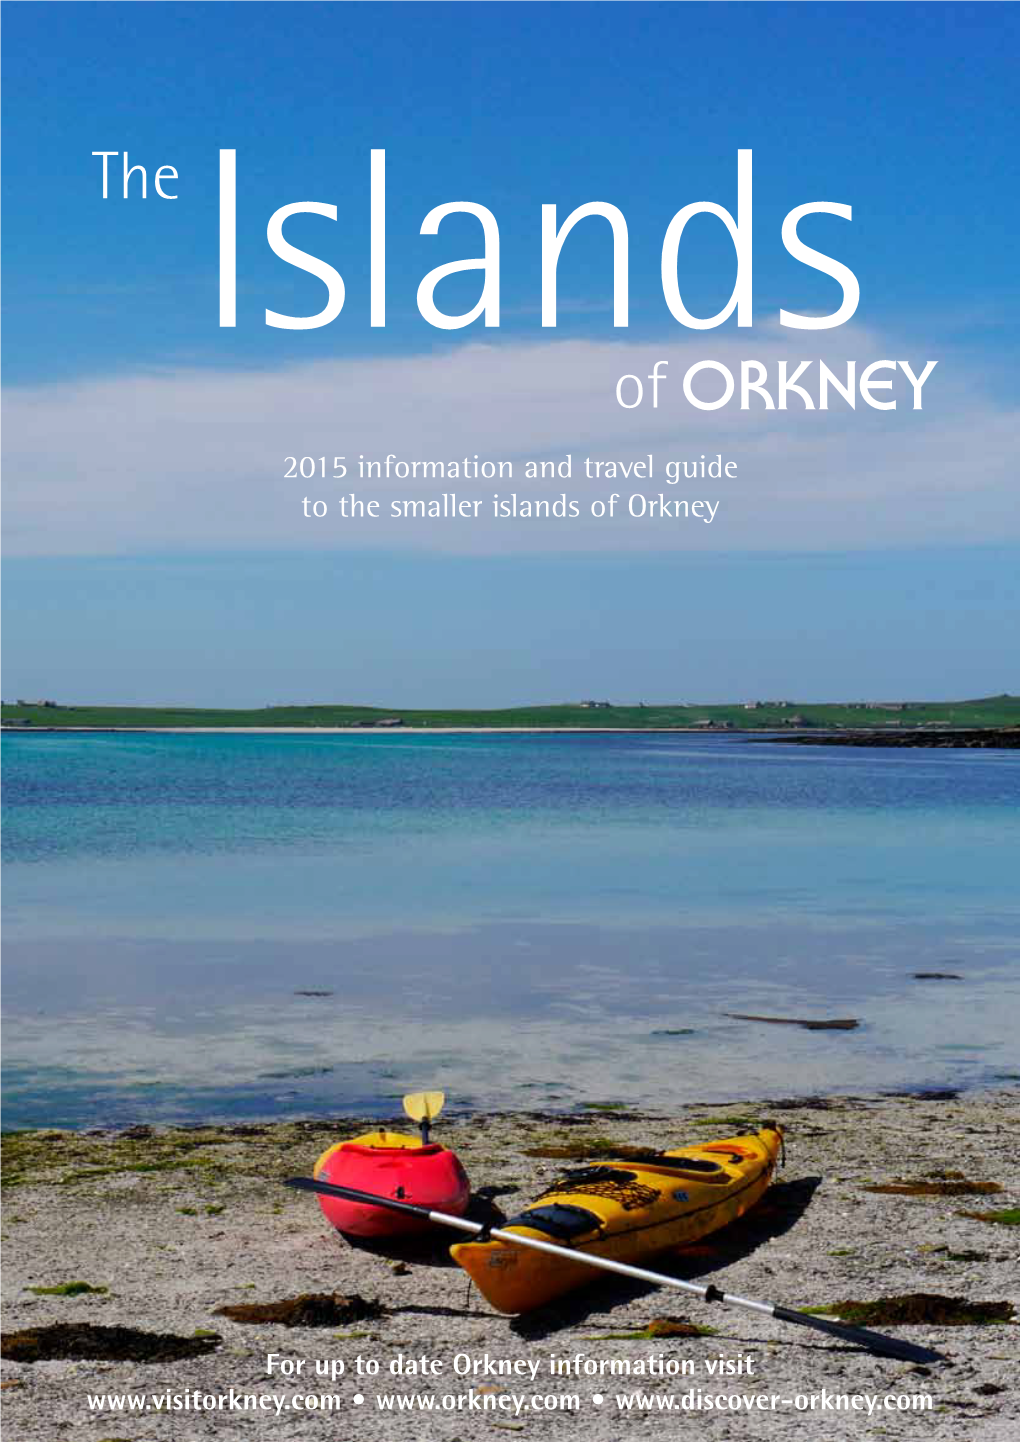 Of Orkn Y 2015 Information and Travel Guide to the Smaller Islands of Orkney